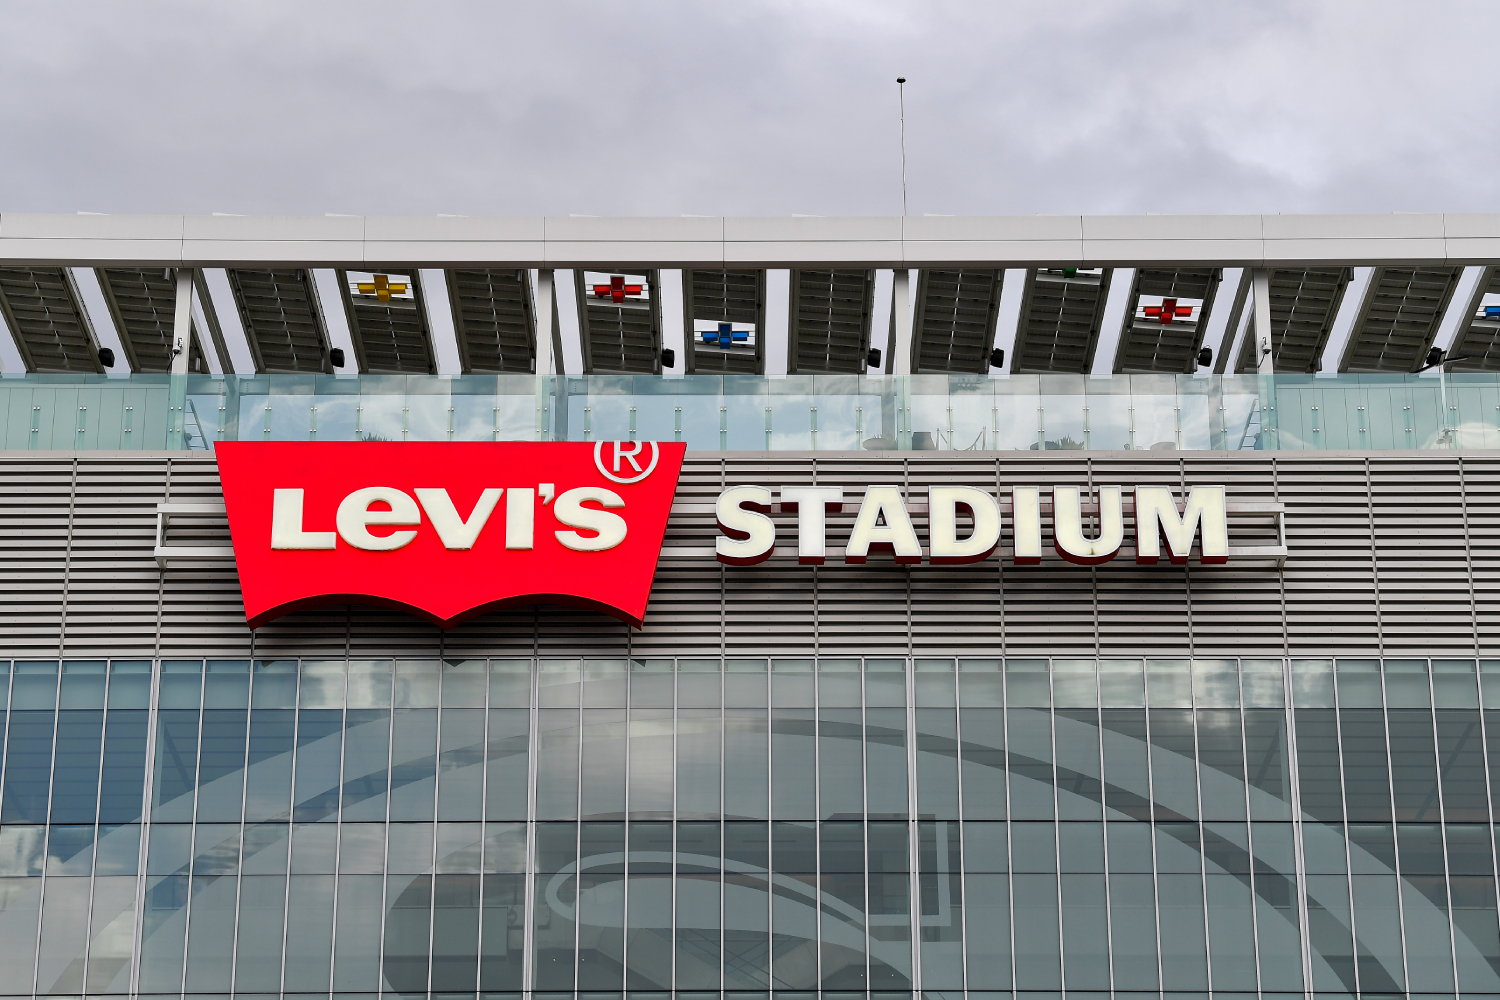 You can have a cardboard cutout at Levi's Stadium this year for $149.